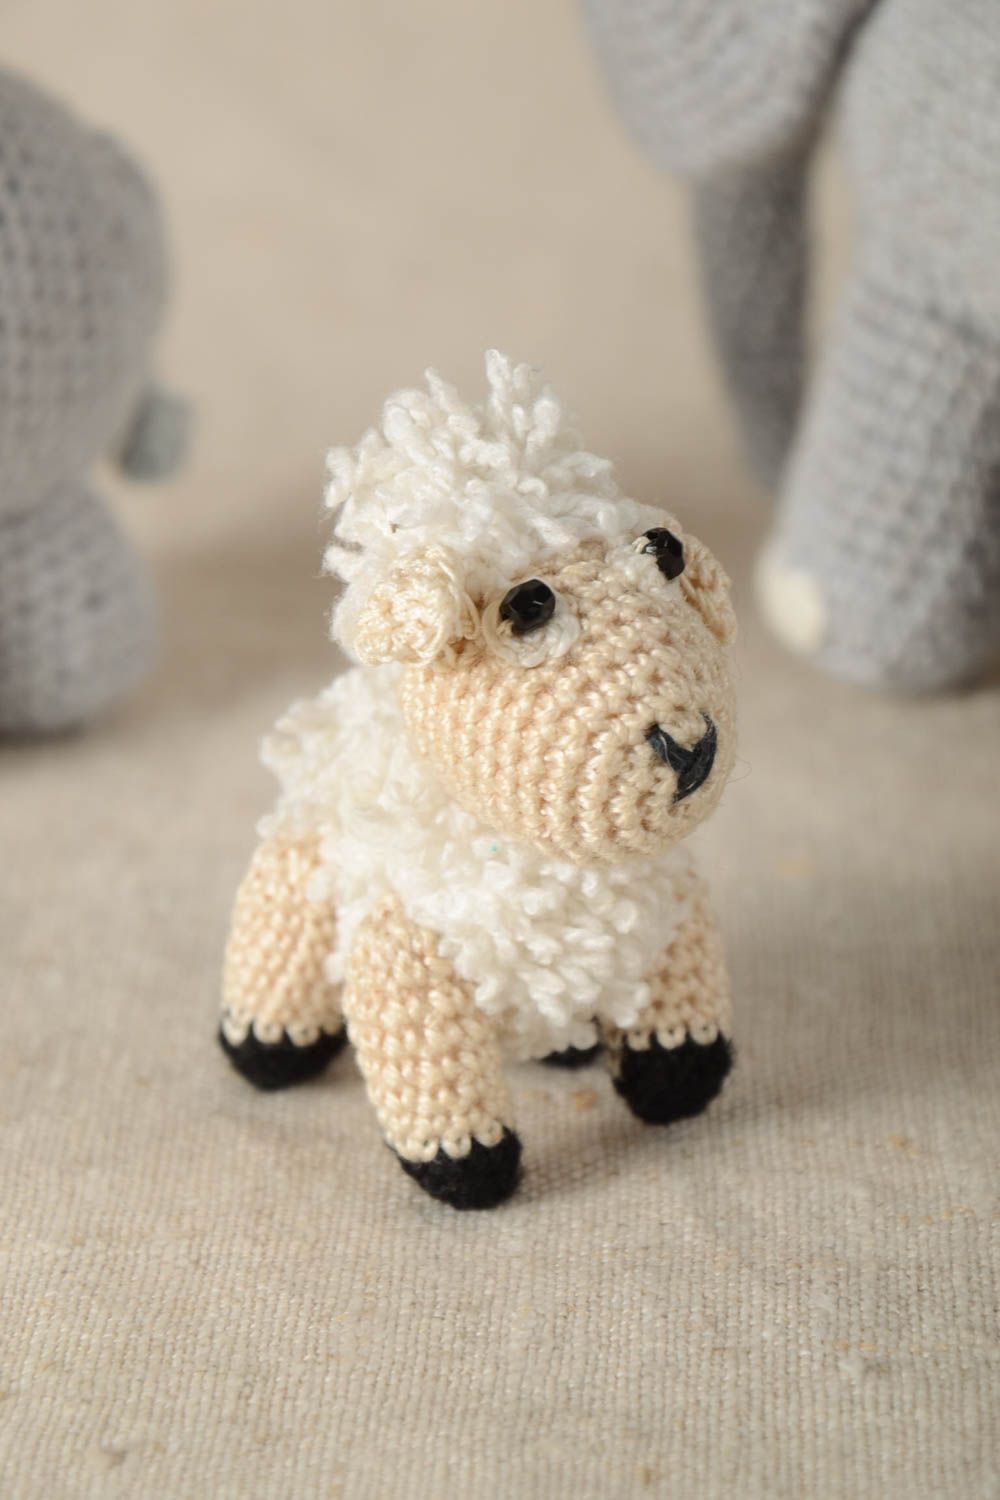 Handmade toy designer toy decor ideas crocheted toy gift for baby animal toy photo 1